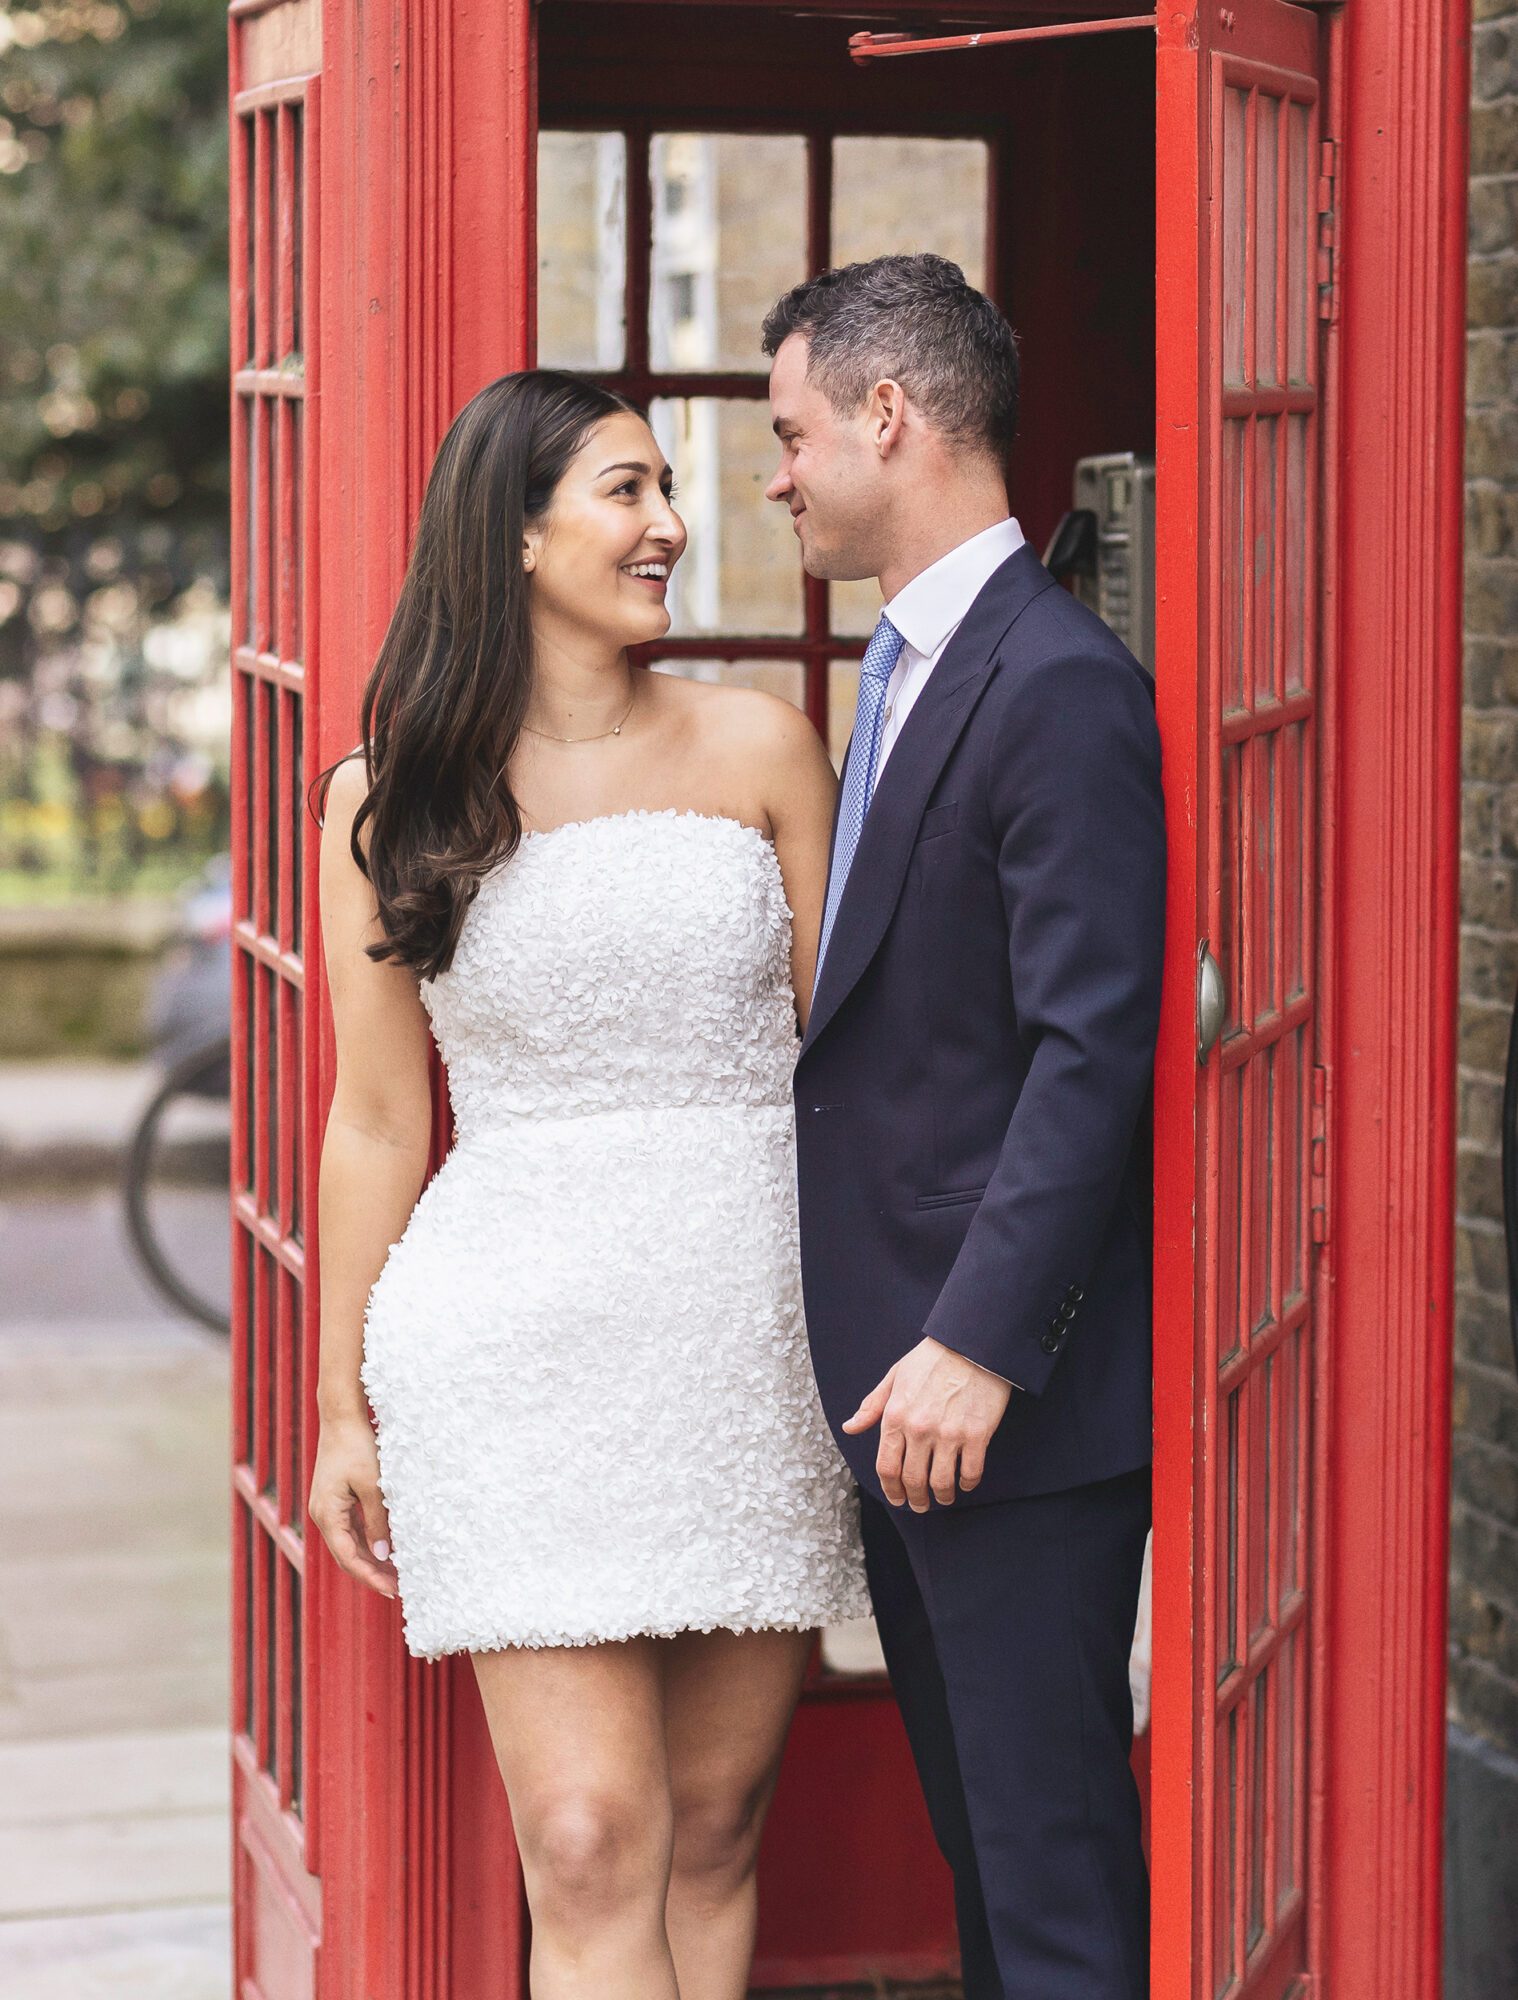 Chelsea Old Town Hall wedding couple by red London phone box